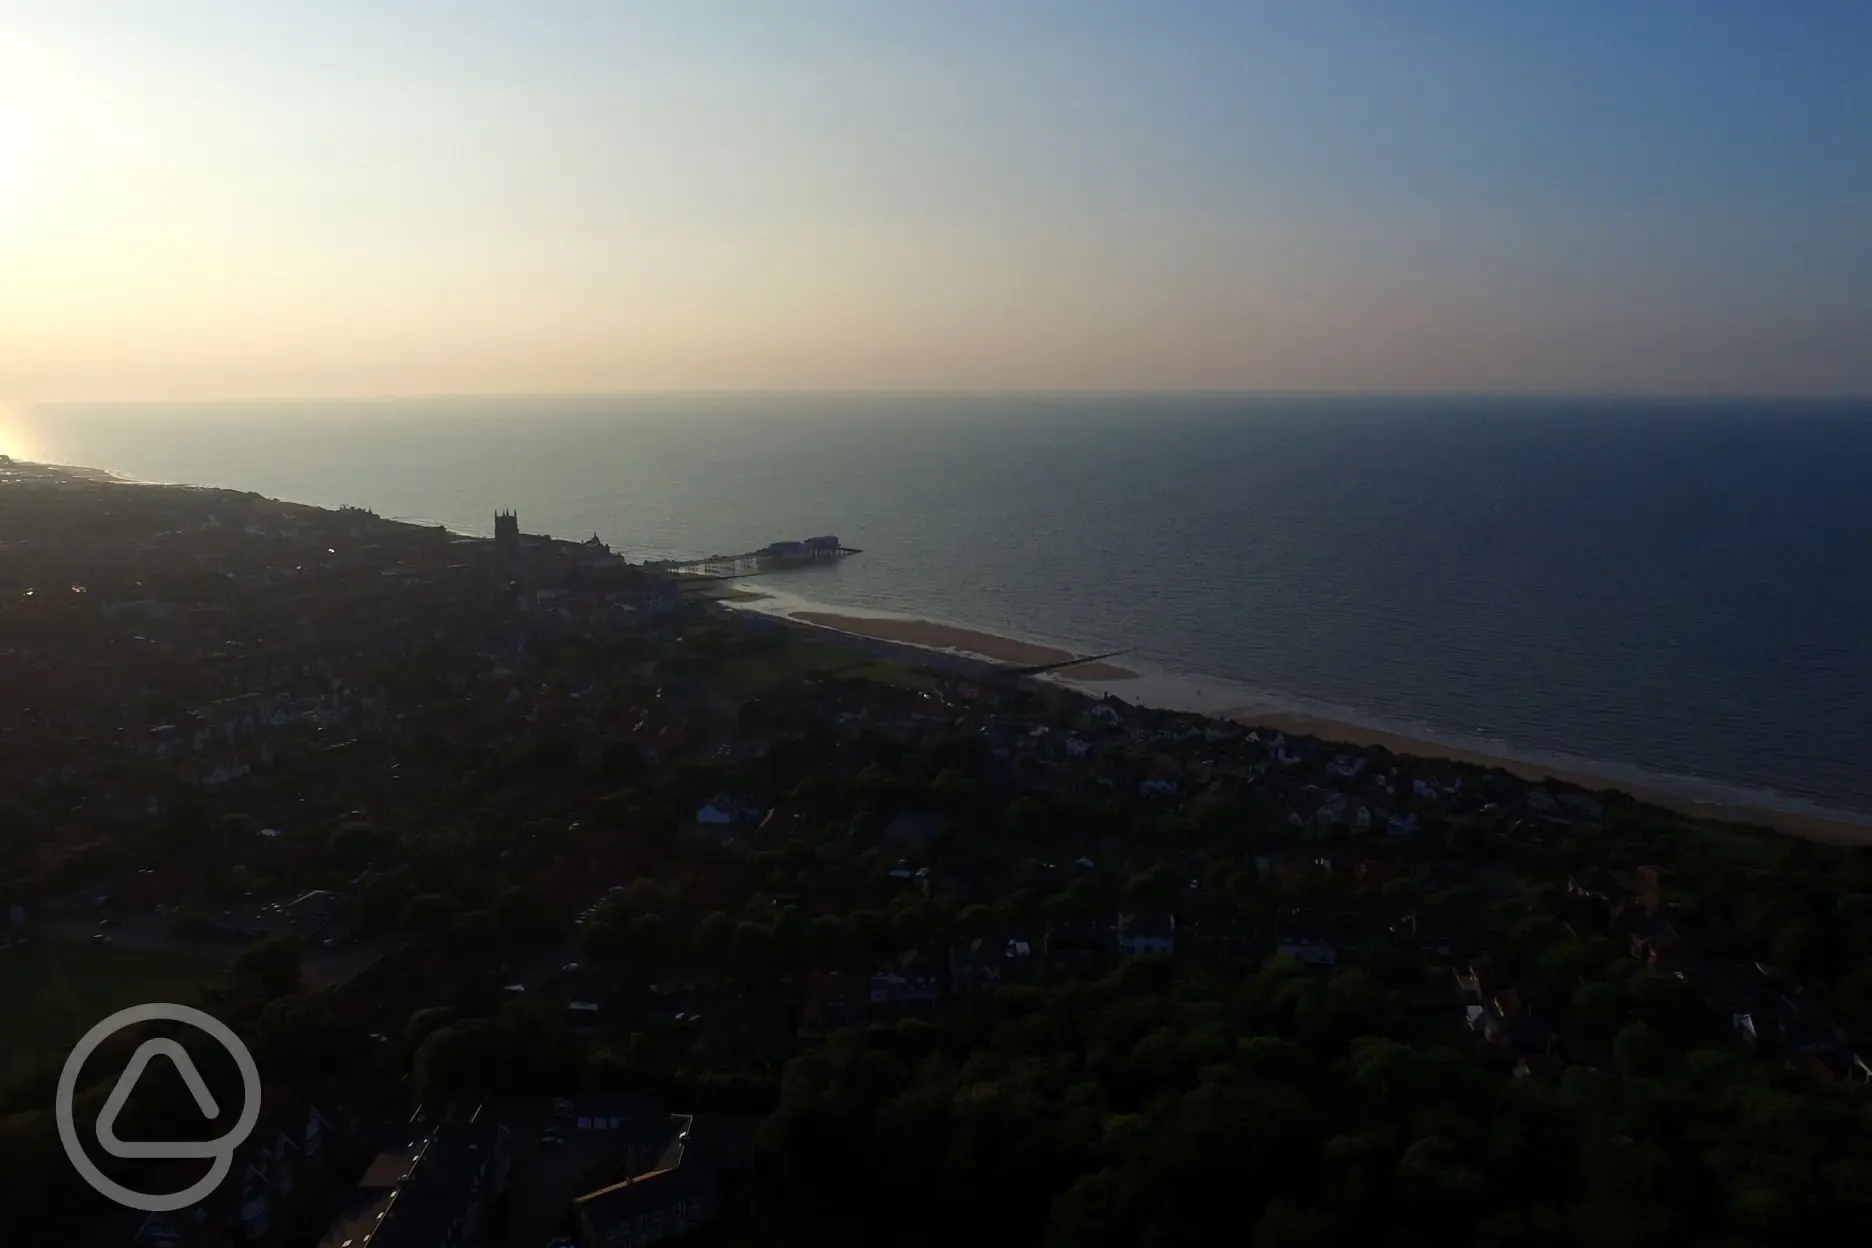 Cromer sunset by drone - the beach is 5 minutes walk away.